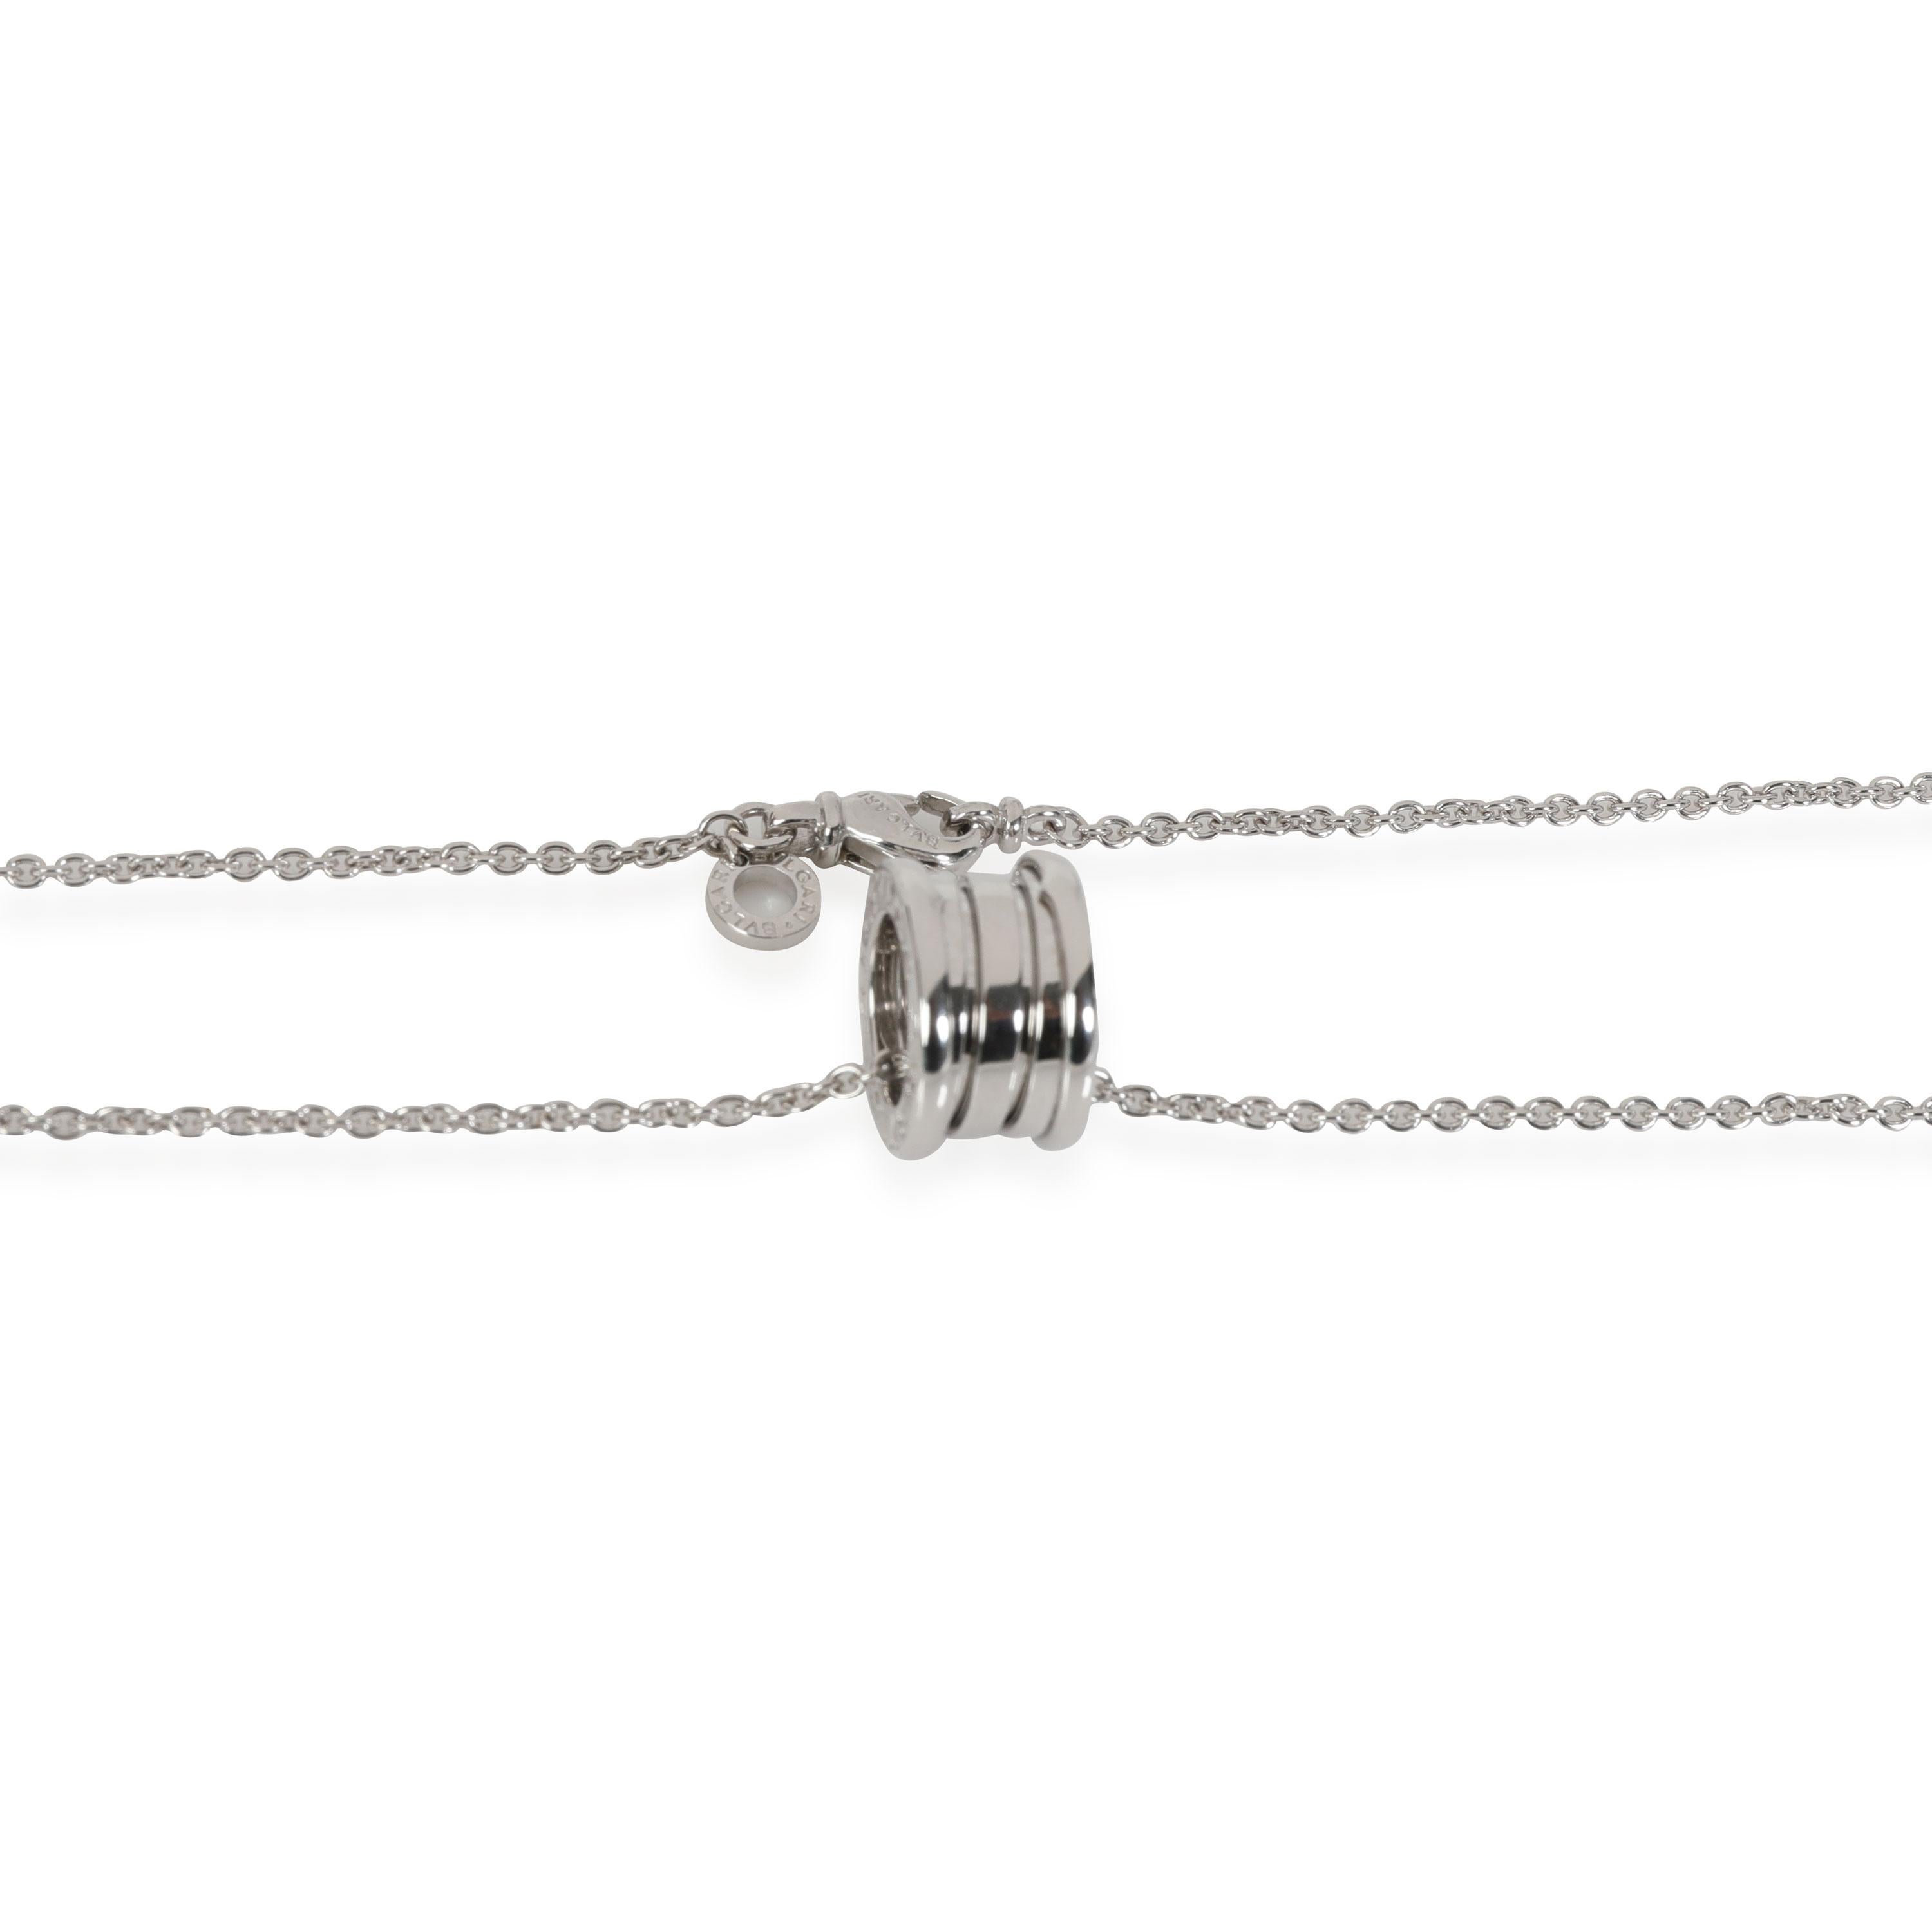 Bulgari B.Zero1 Fashion Necklace in 18k White Gold In Excellent Condition For Sale In New York, NY